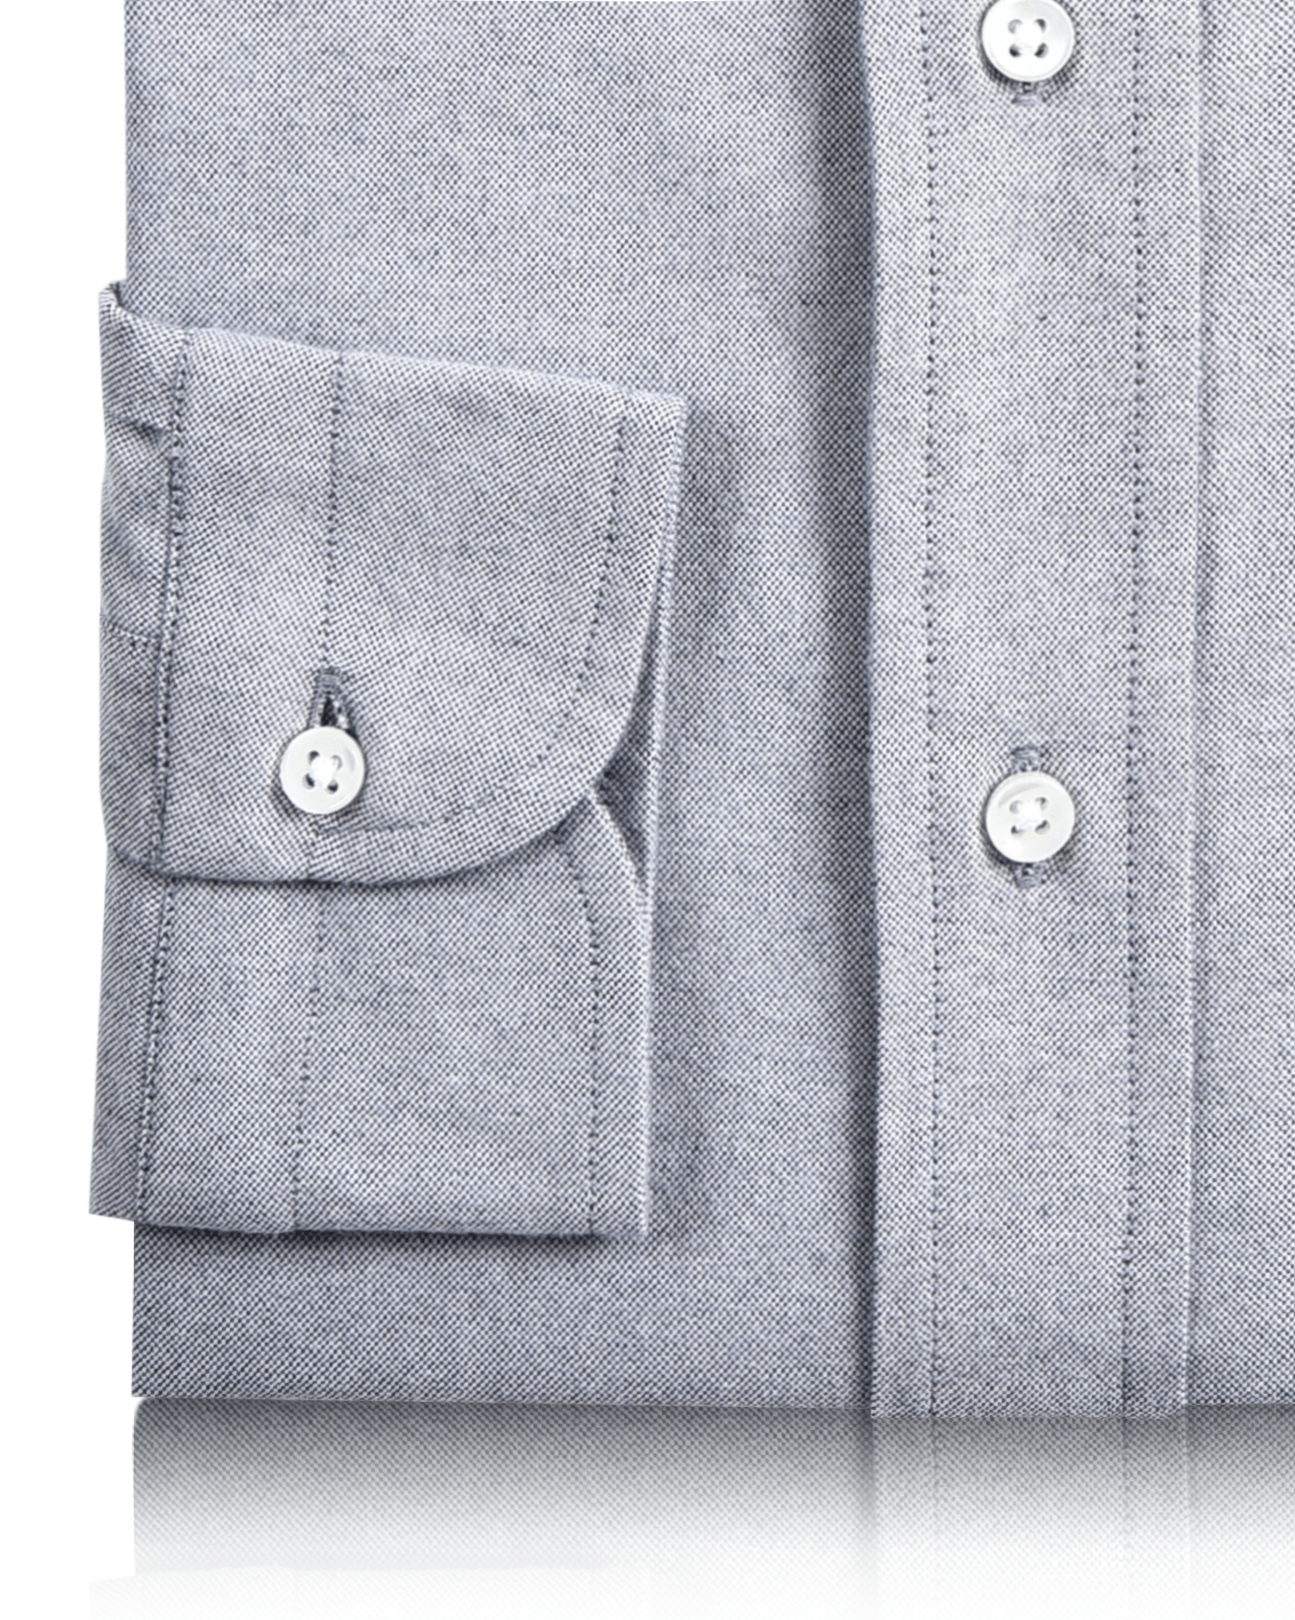 Cuff of the custom oxford shirt for men by Luxire in stone grey